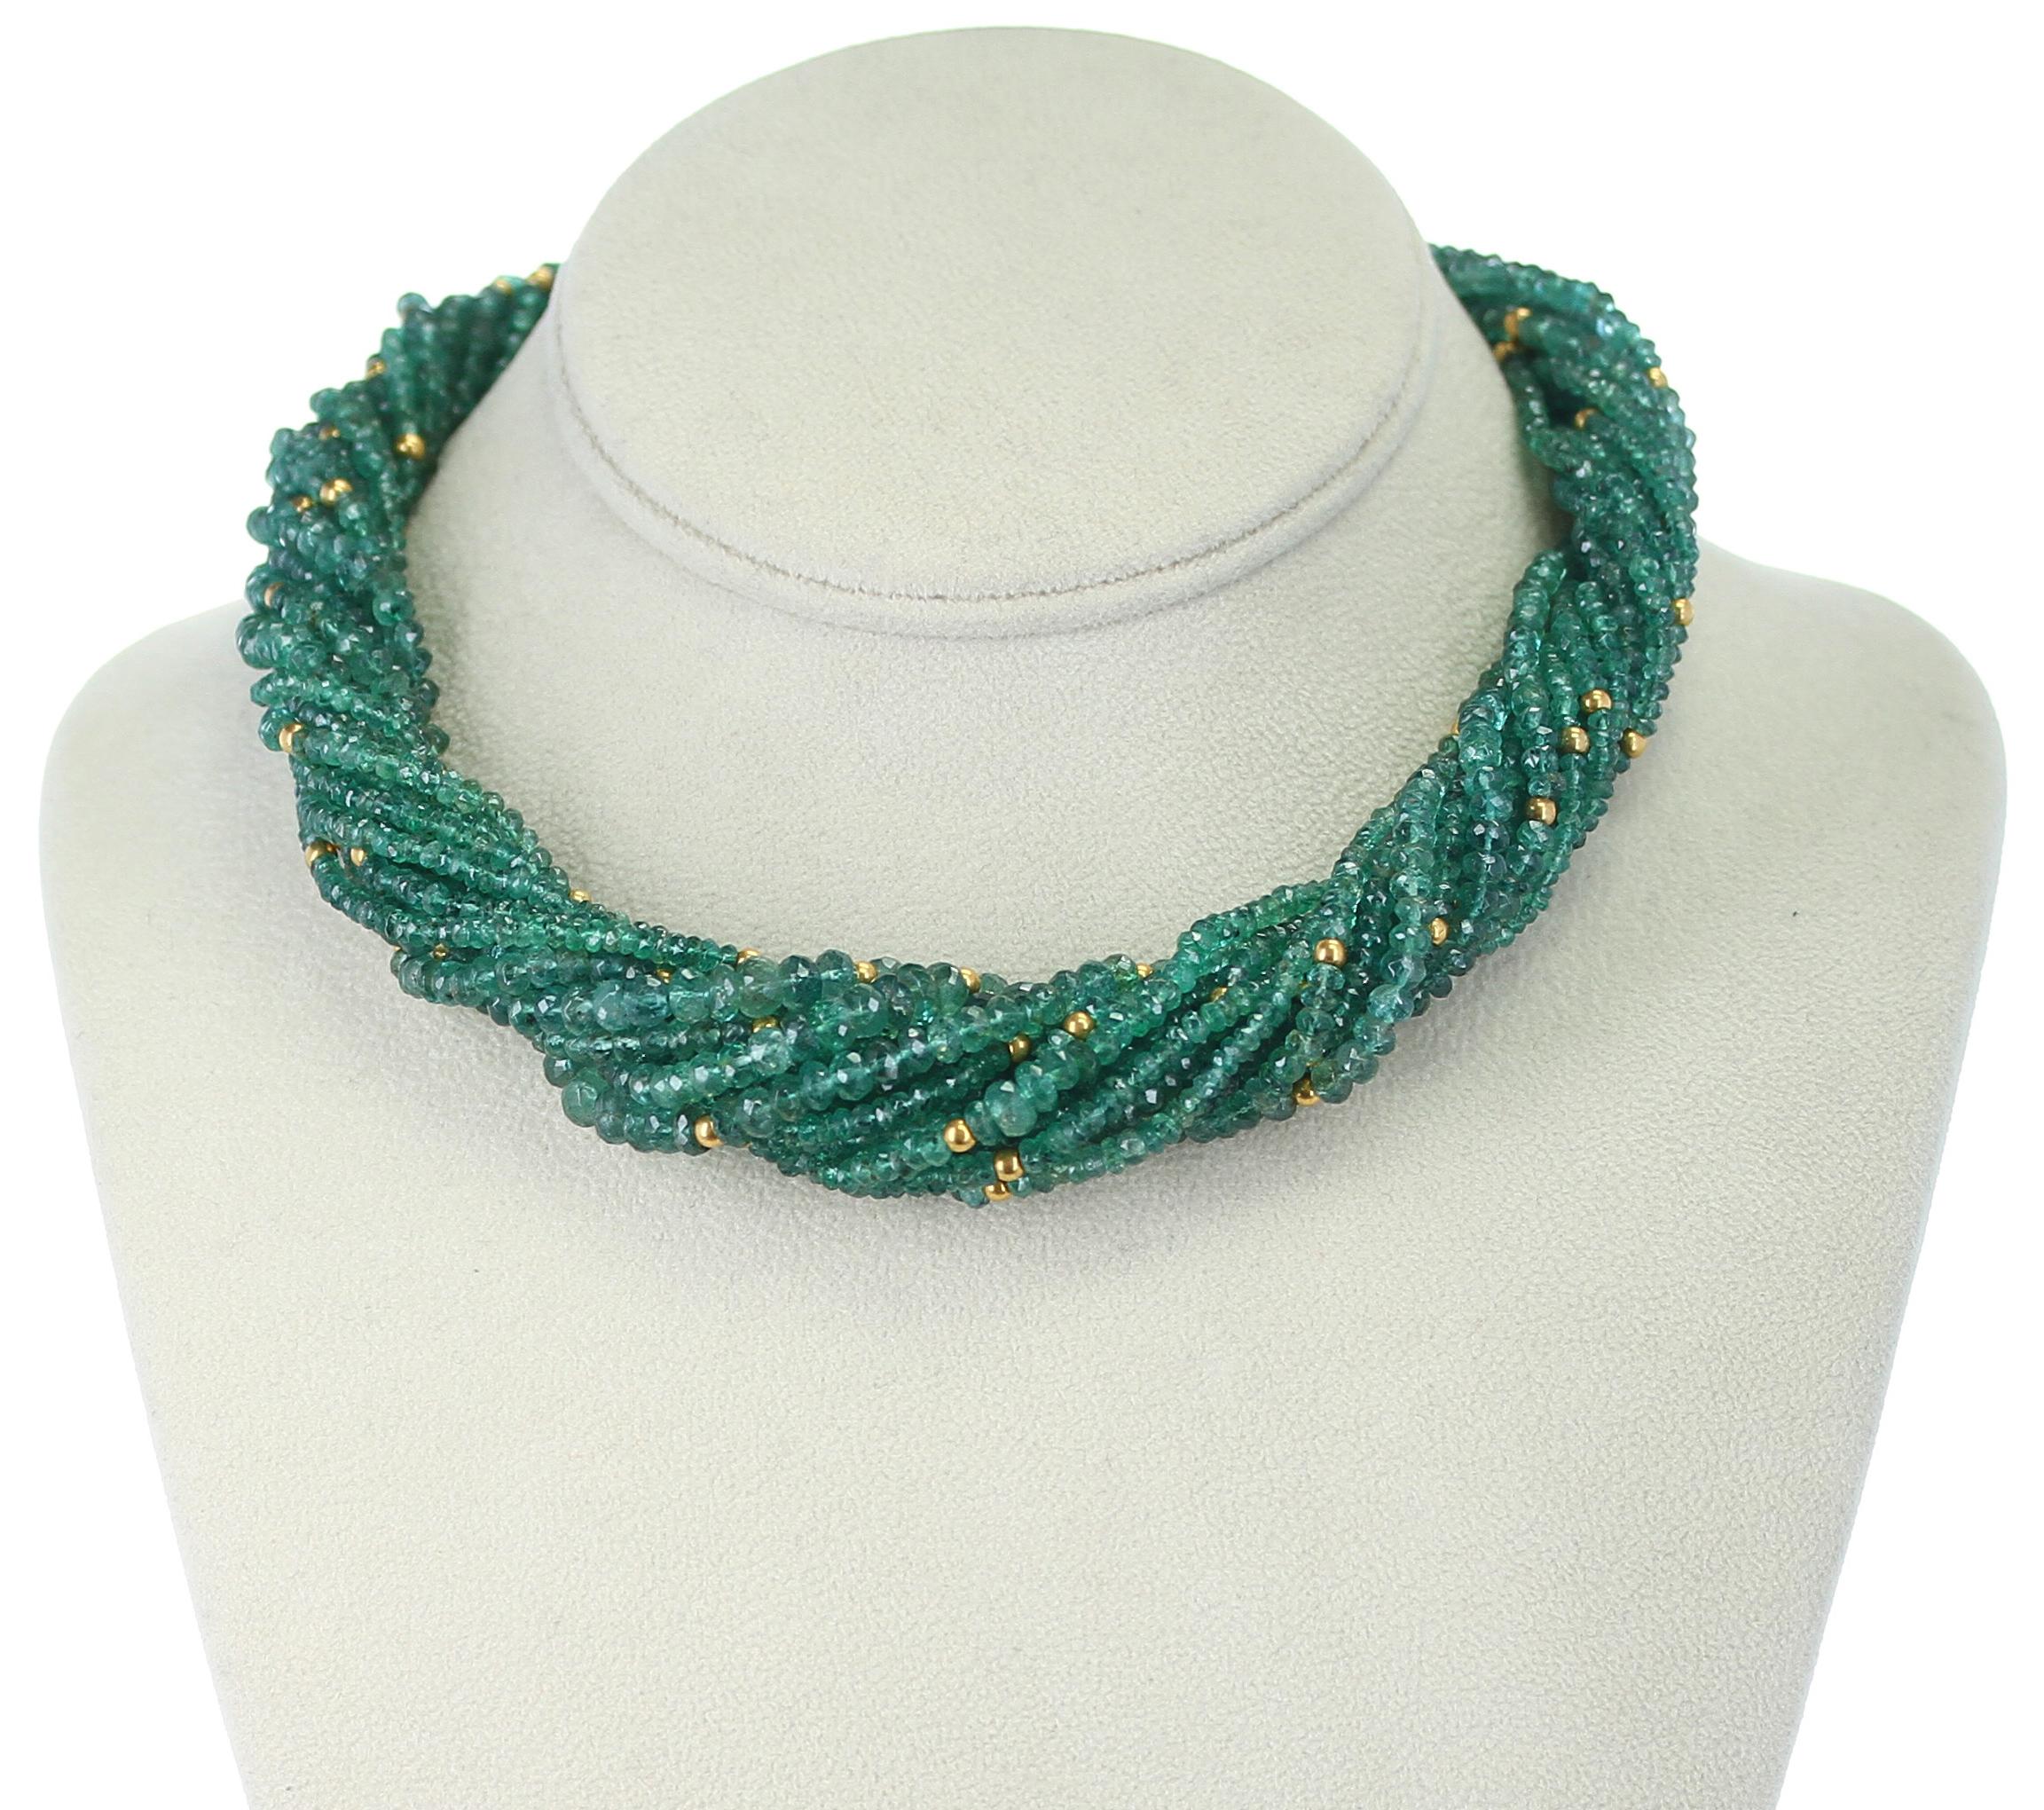 A Genuine & Natural Emerald Faceted with Gold Beads Choker Necklace consisting of 15 lines weighing 540 carats with an 18K Yellow Gold Clasp. The length is 17.50